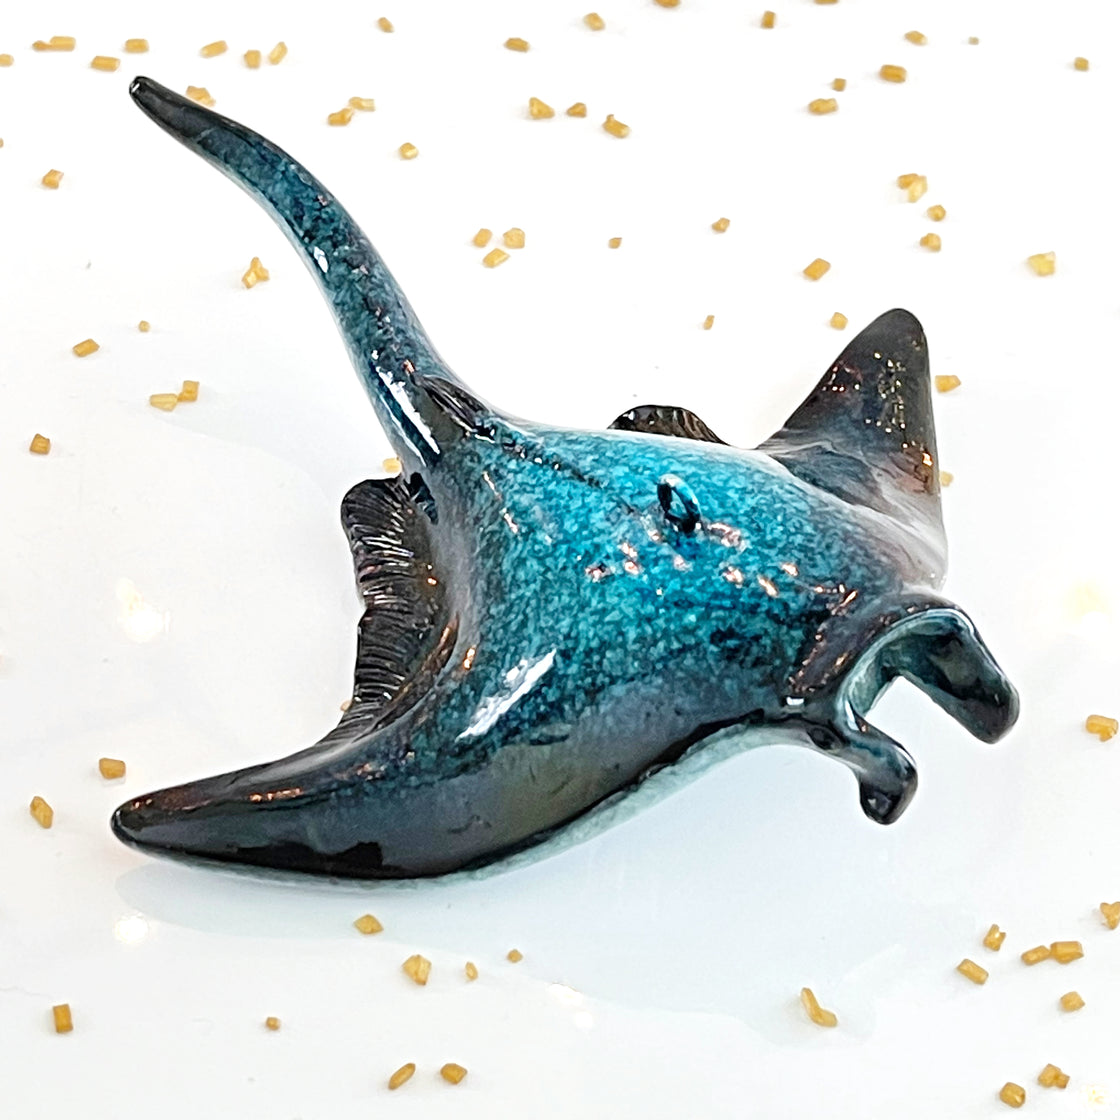 An up-close view of the Rengora manta ray Christmas ornament